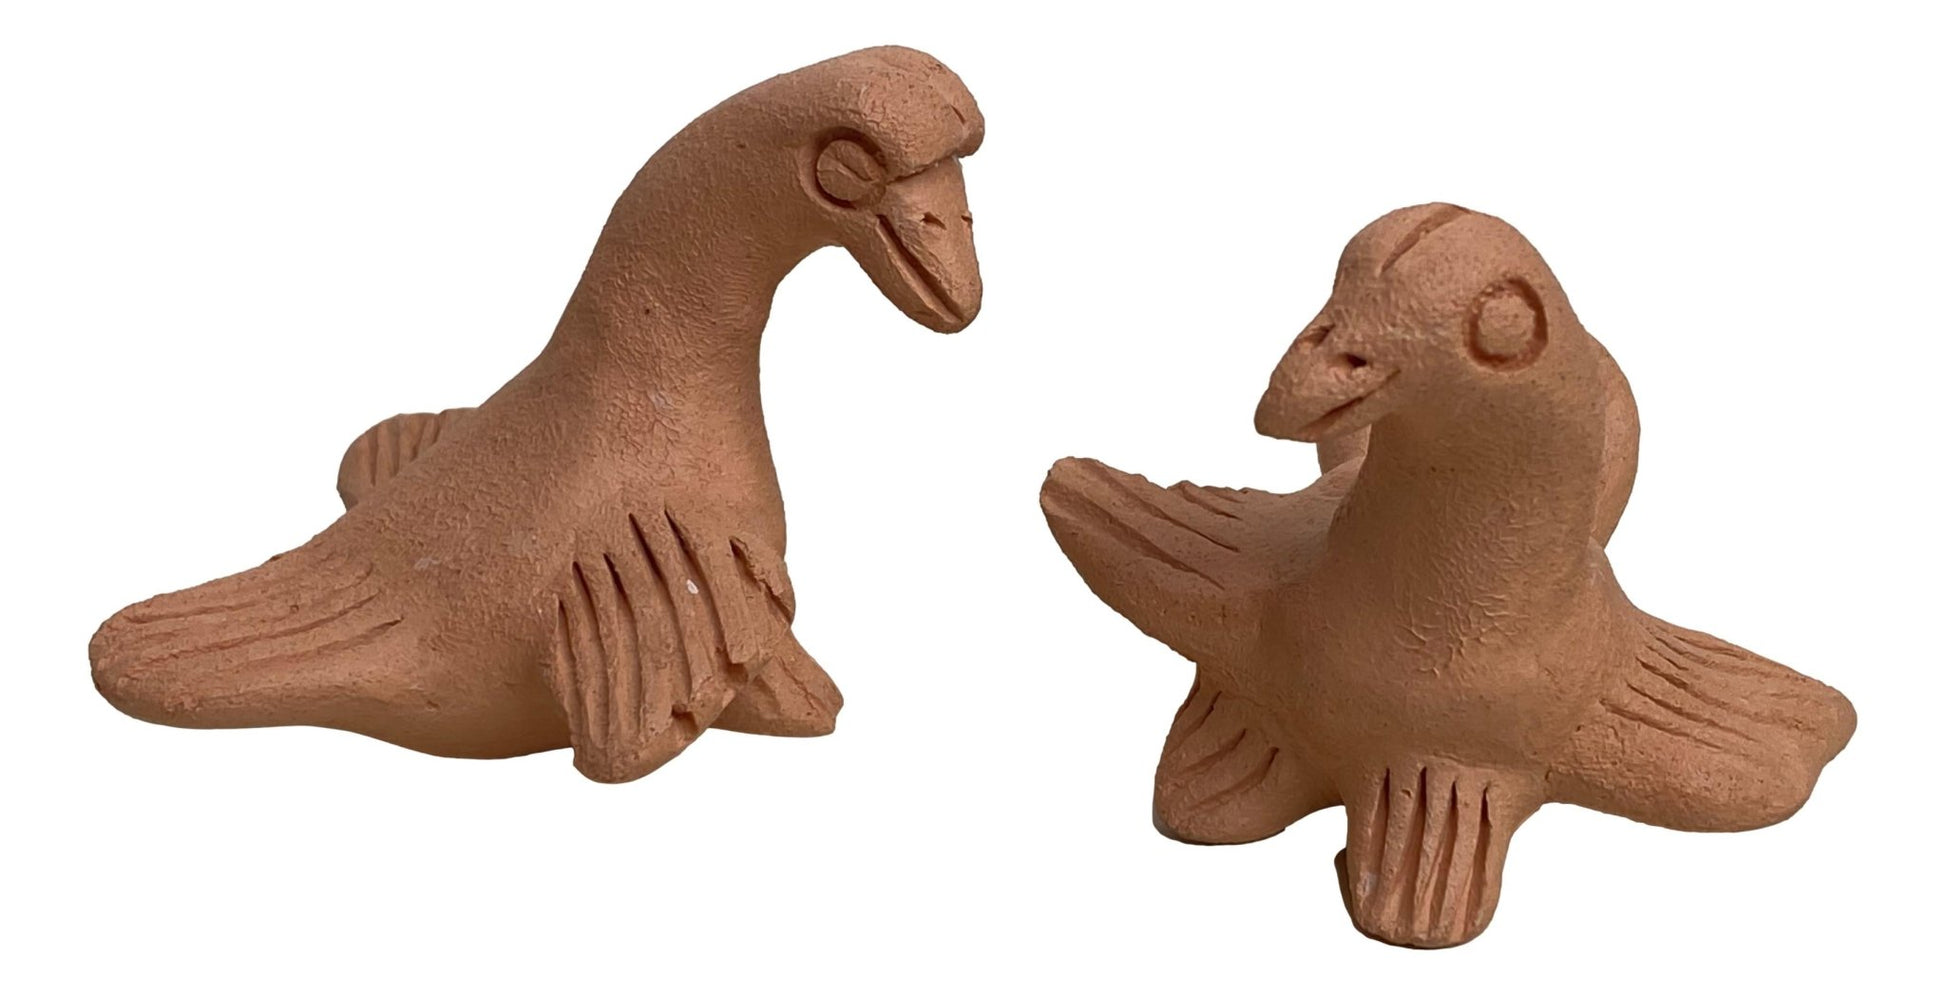 Figurines Clay Native American Turtle Doves Handcrafted by Local Artisan L.B. 2 L x 2 W x 2 H Inches - Ysleta Mission Gift Shop- VOTED 2022 El Paso's Best Gift Shop